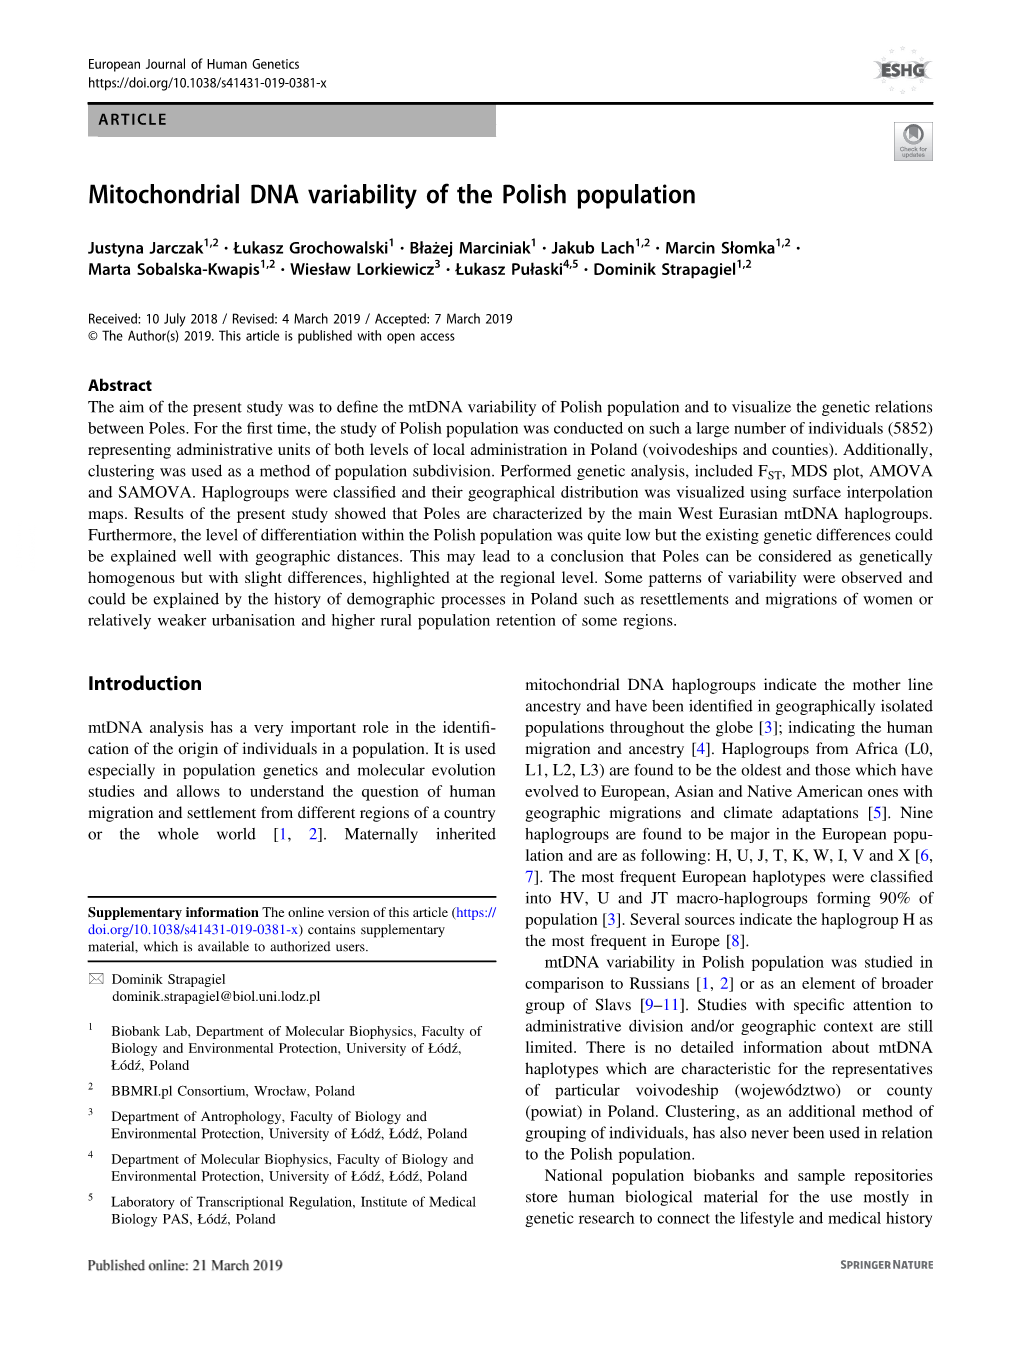 Mitochondrial DNA Variability of the Polish Population